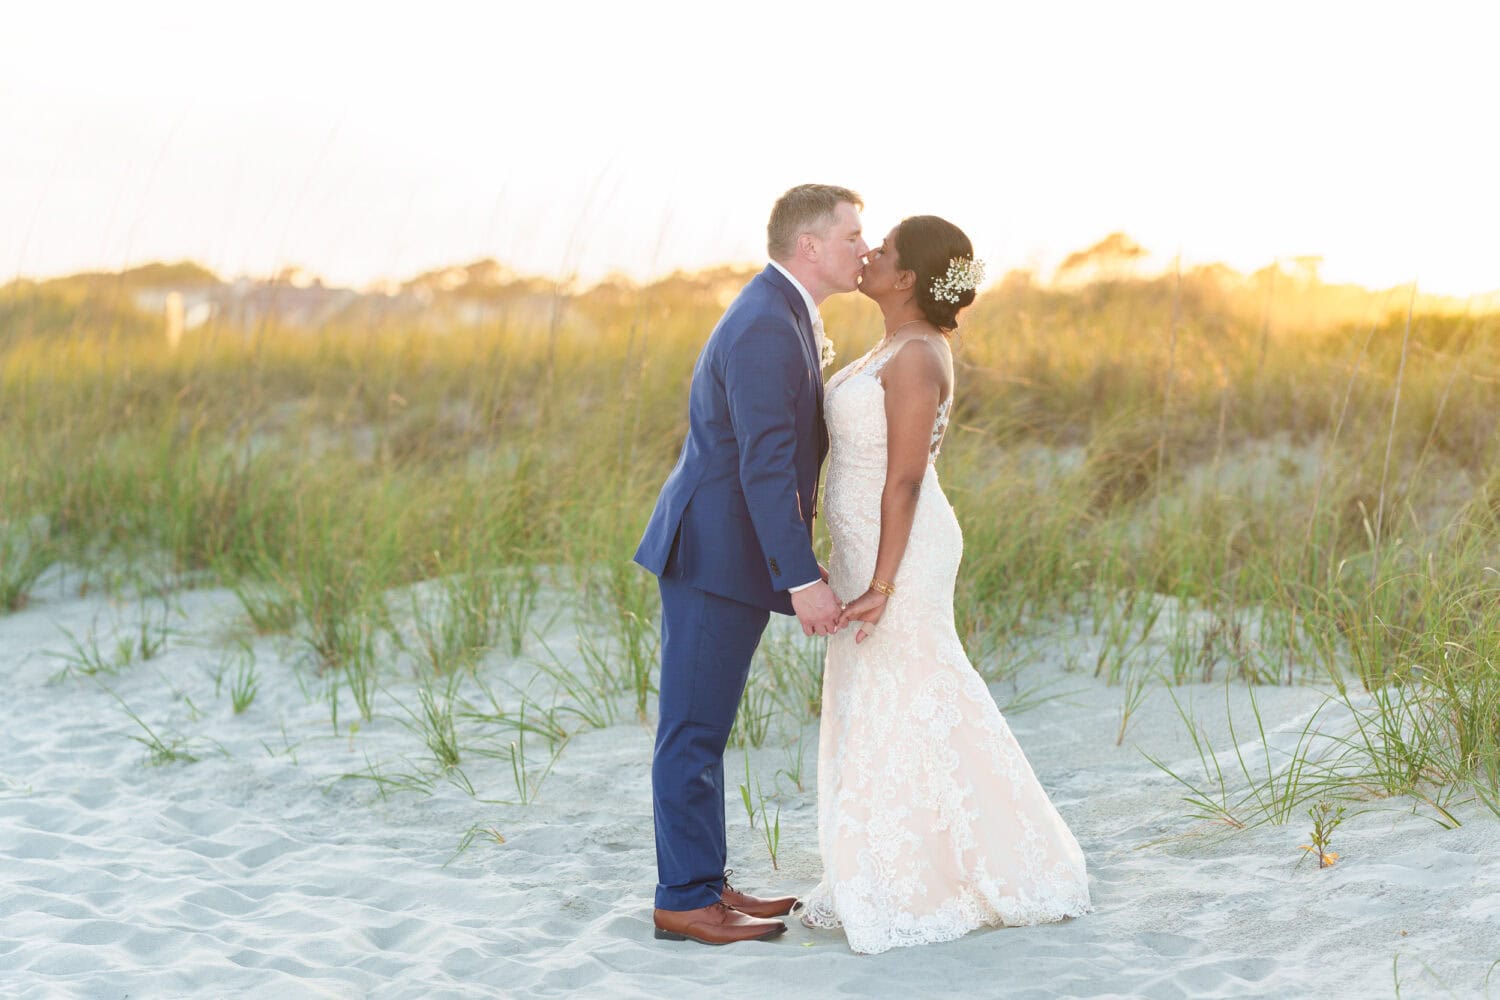 Sunset portraits in front of the sea oats and dunes - 21 Main Events